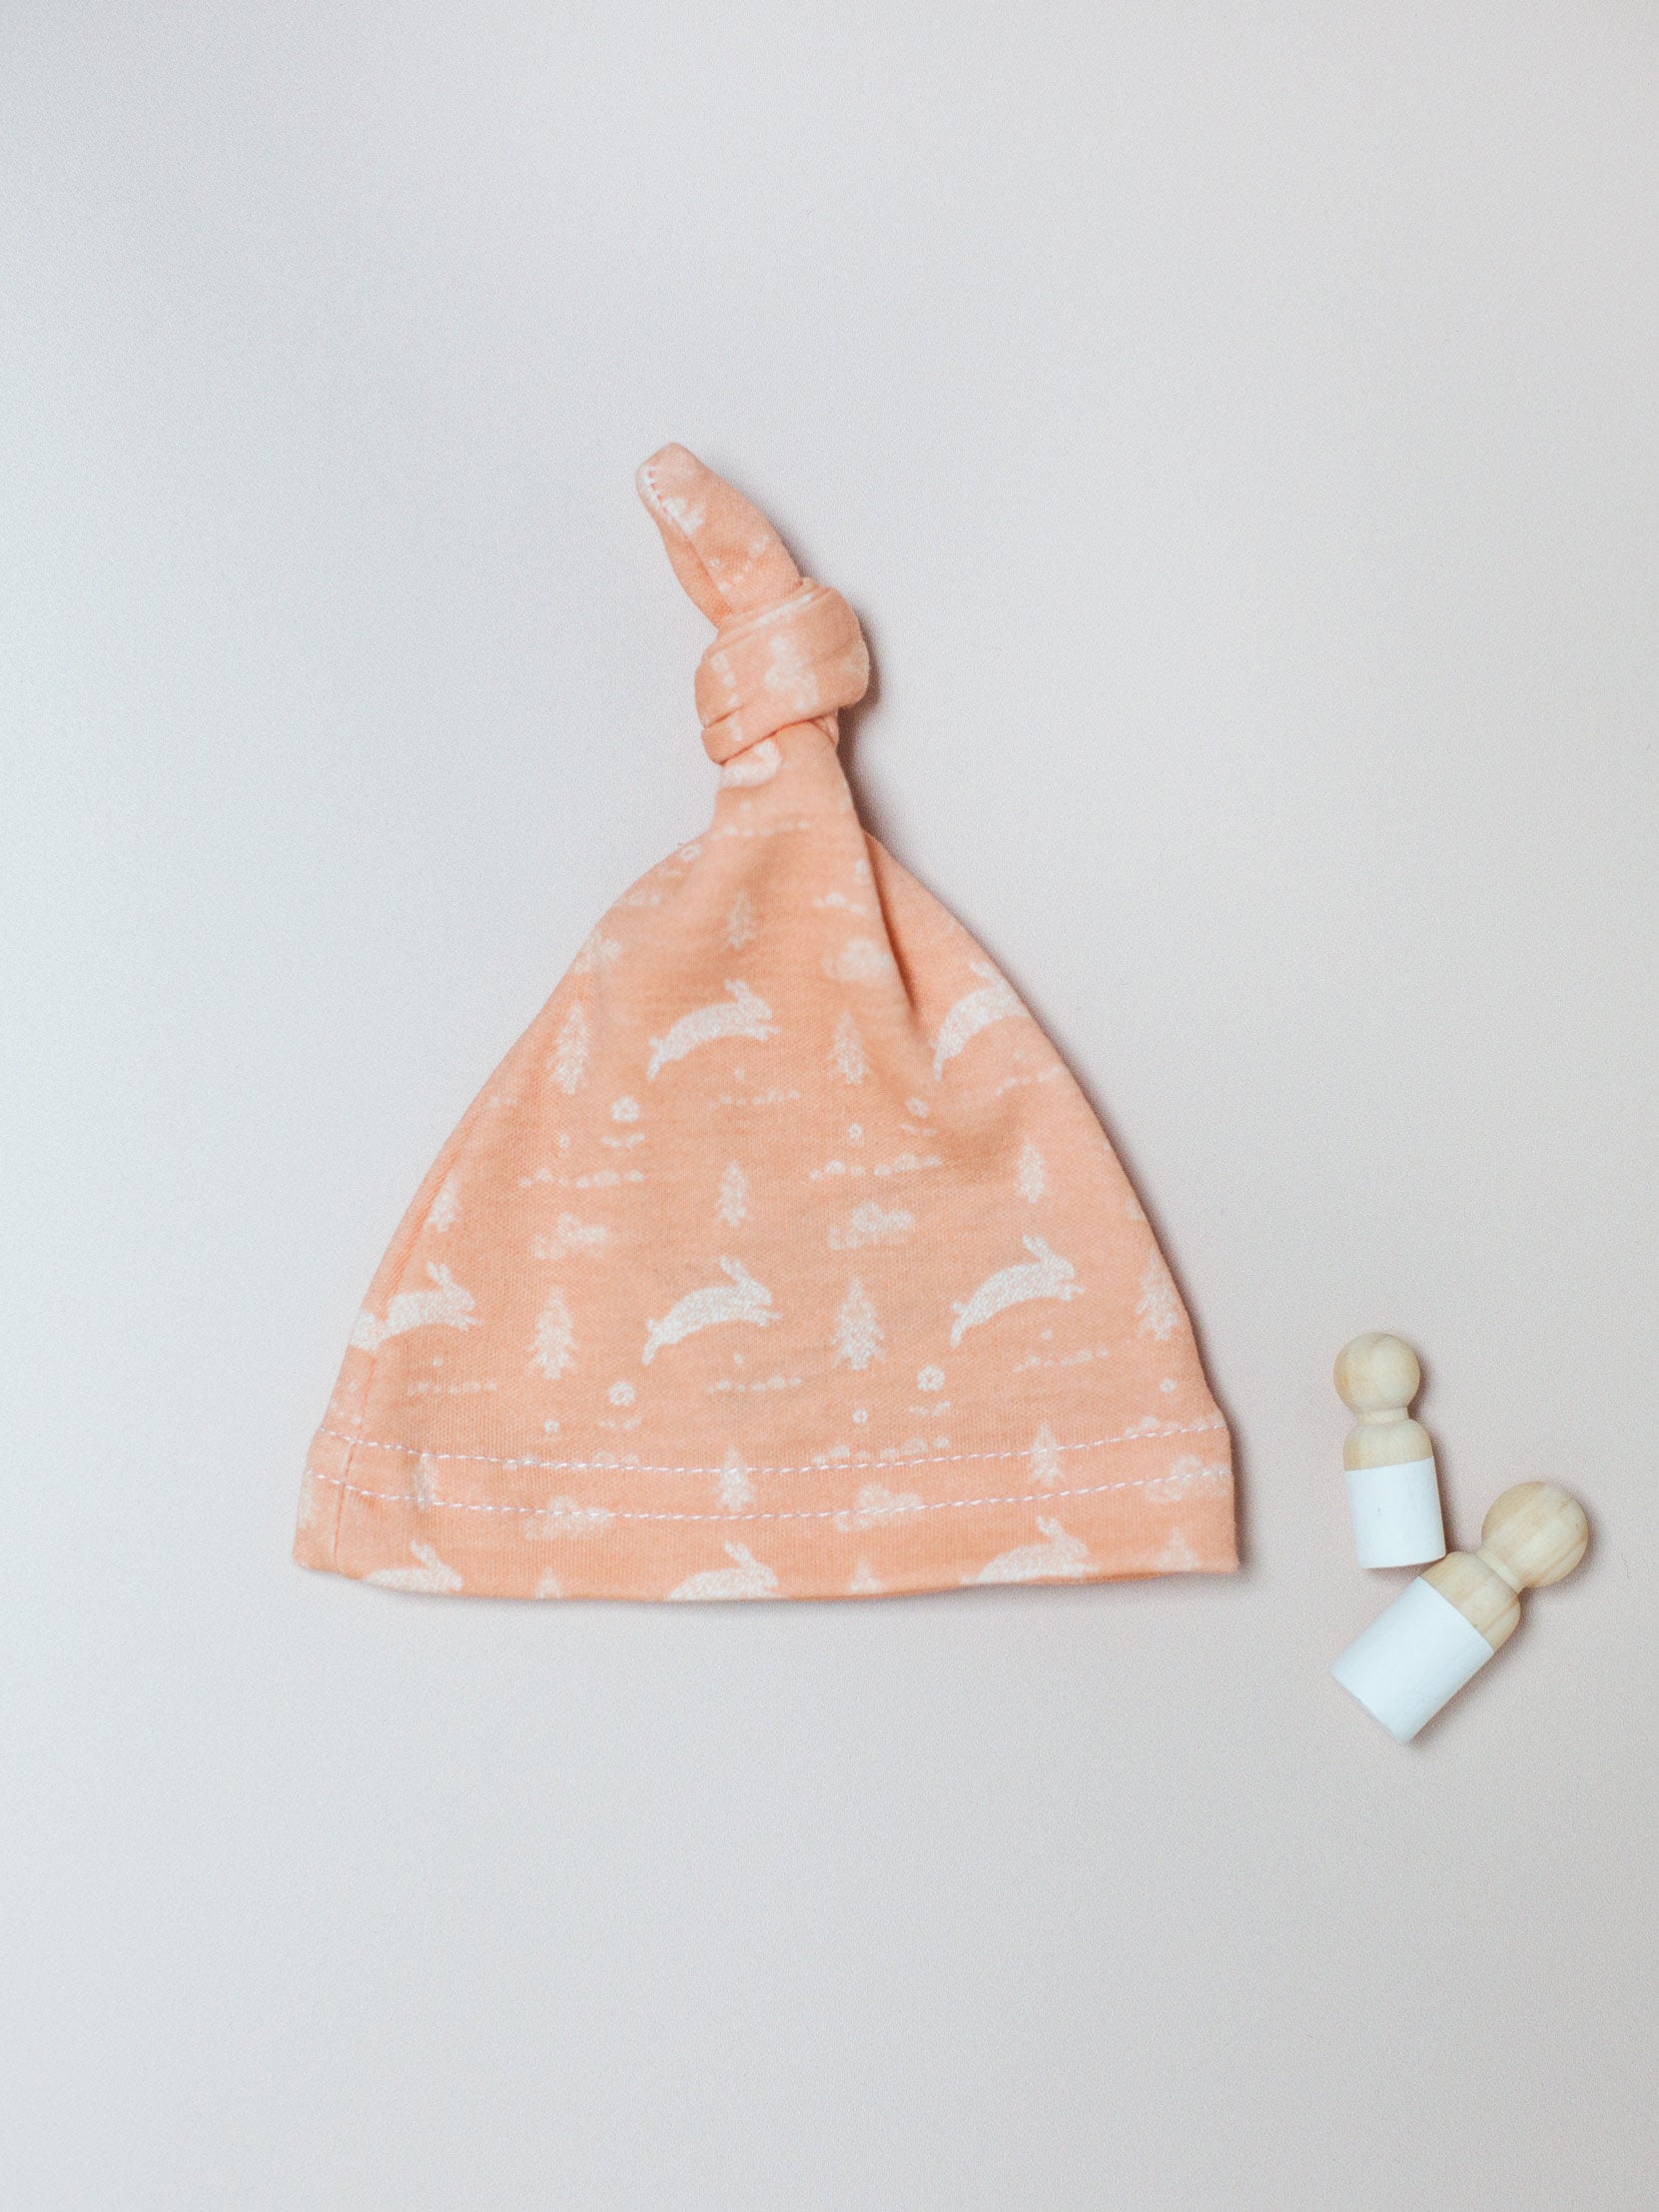 Knotted Hat, Leaping Bunnies, Premium 100% Organic Cotton Hat Tiny & Small 